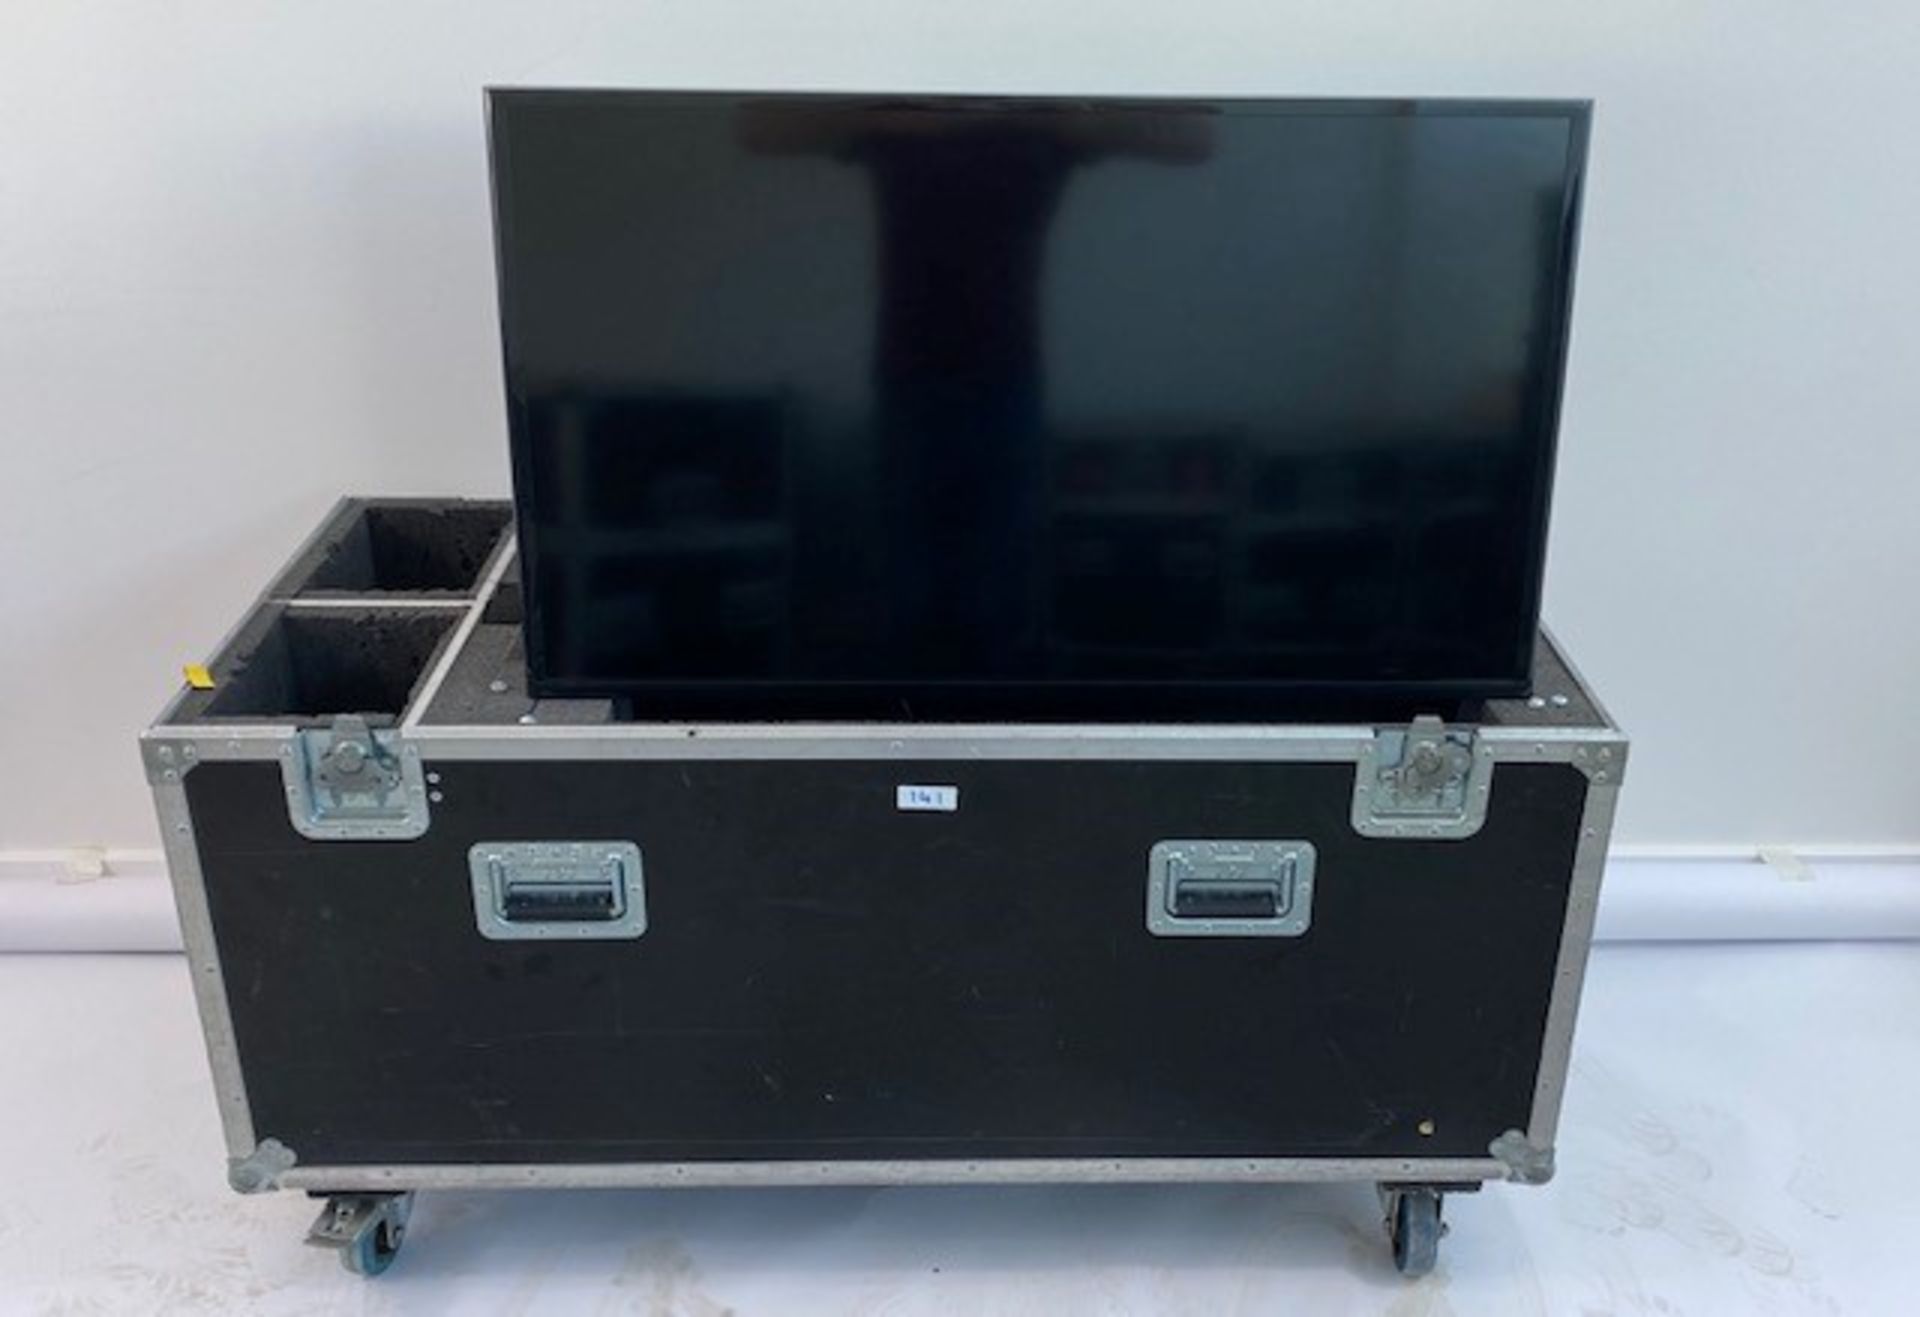 2 x Samsung 43" Televisions with Hanging Brackets In A Dual Wheeled Flight Case - Ref: 142 - CL581 - - Image 3 of 5